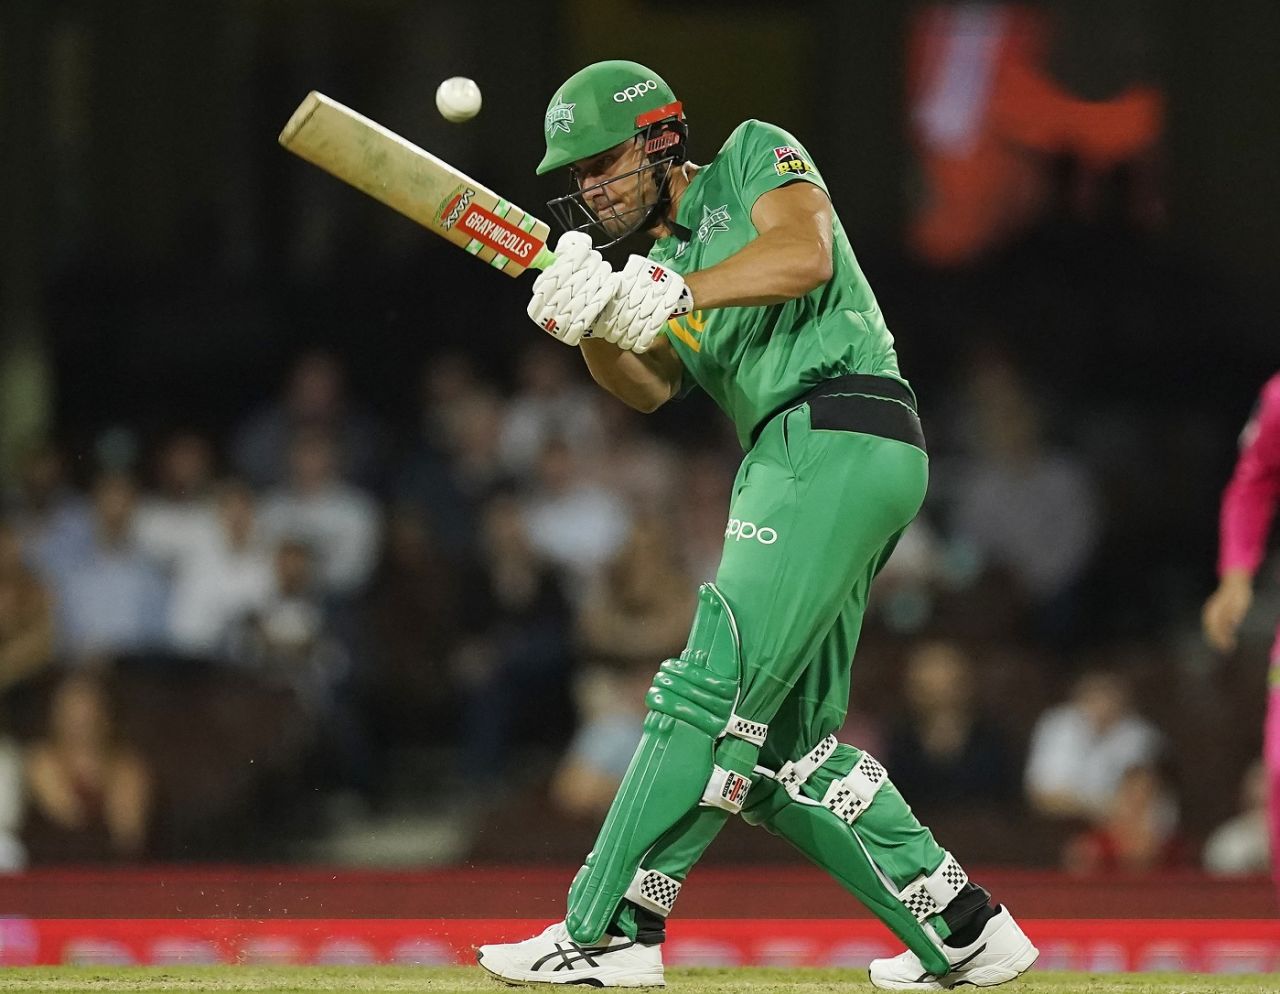 Marcus Stoinis gave the Stars a chance with a quick fifty, Sydney Sixers v Melbourne Stars, Big Bash league 2019-20, Sydney, January 20, 2020